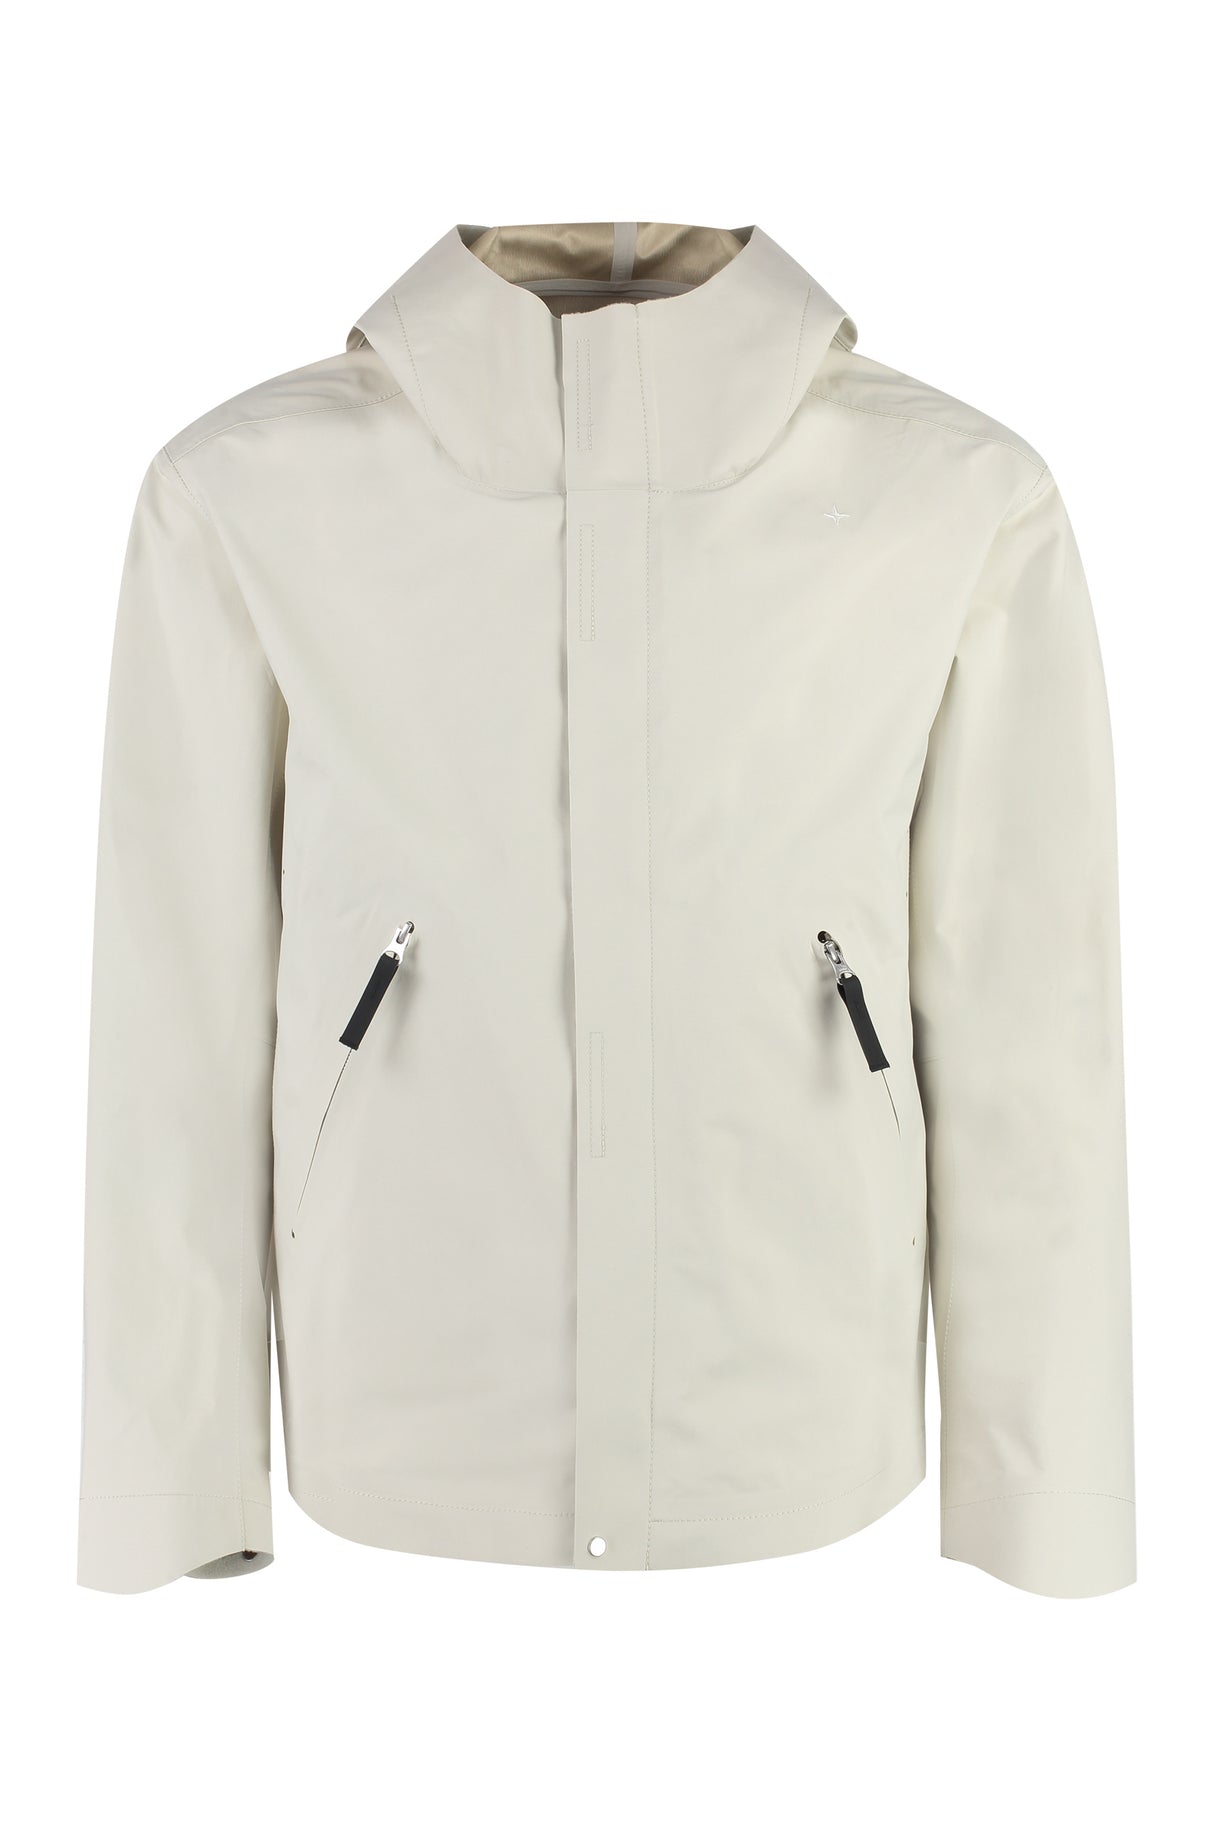 STONE ISLAND Ivory Technical Fabric Hooded Jacket for Men